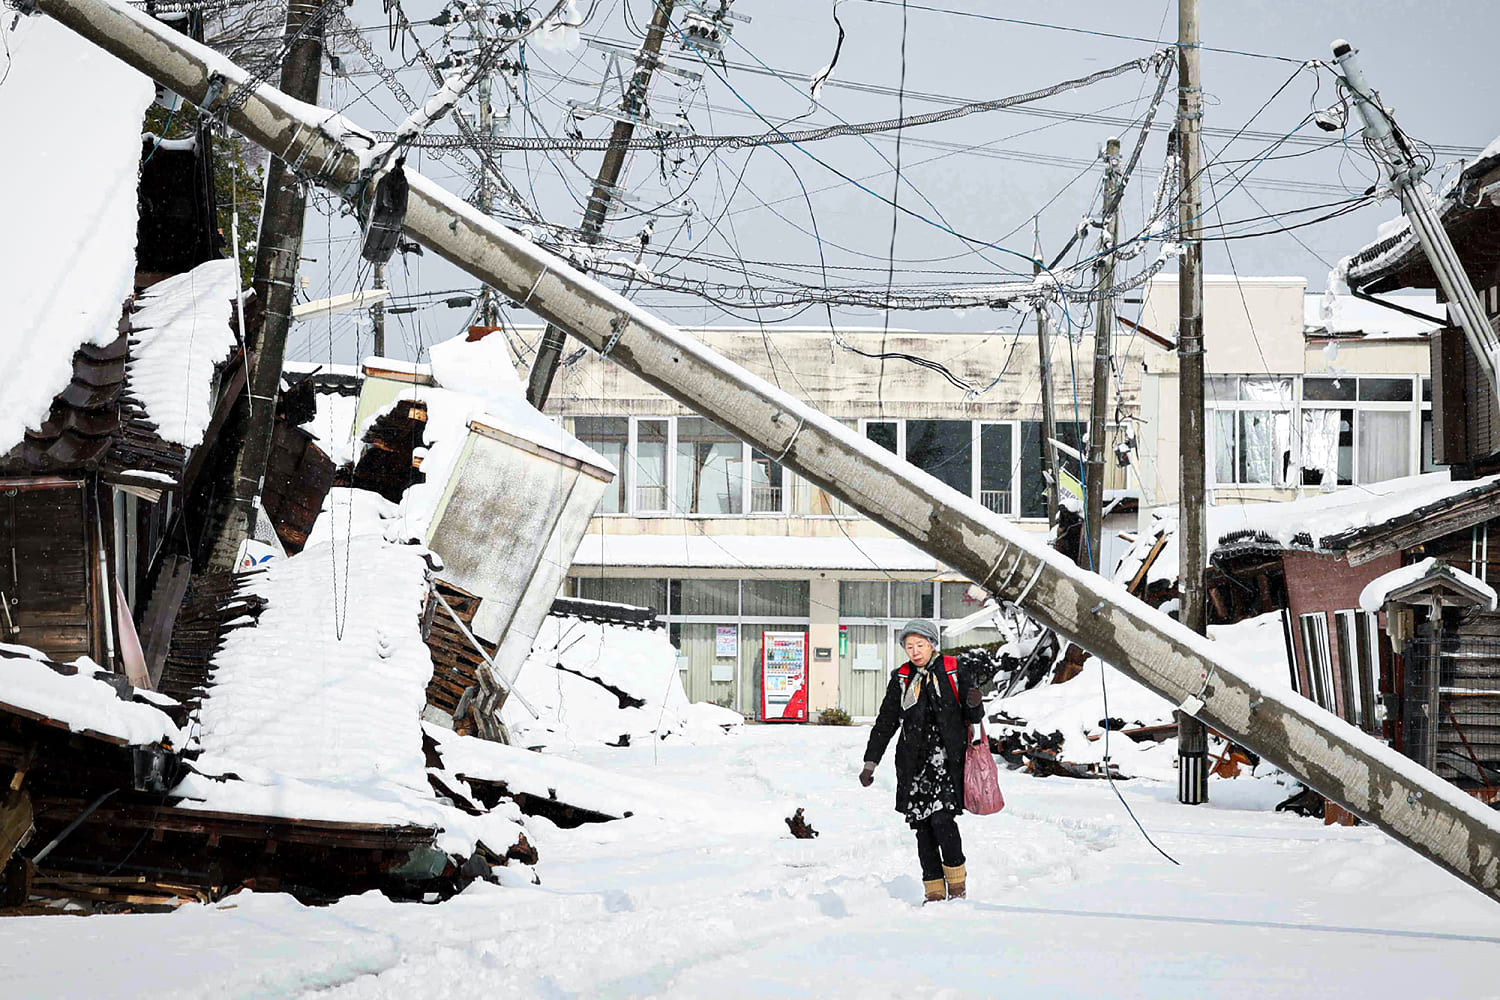 Can heavy snowfall trigger earthquakes? A new study suggests a link